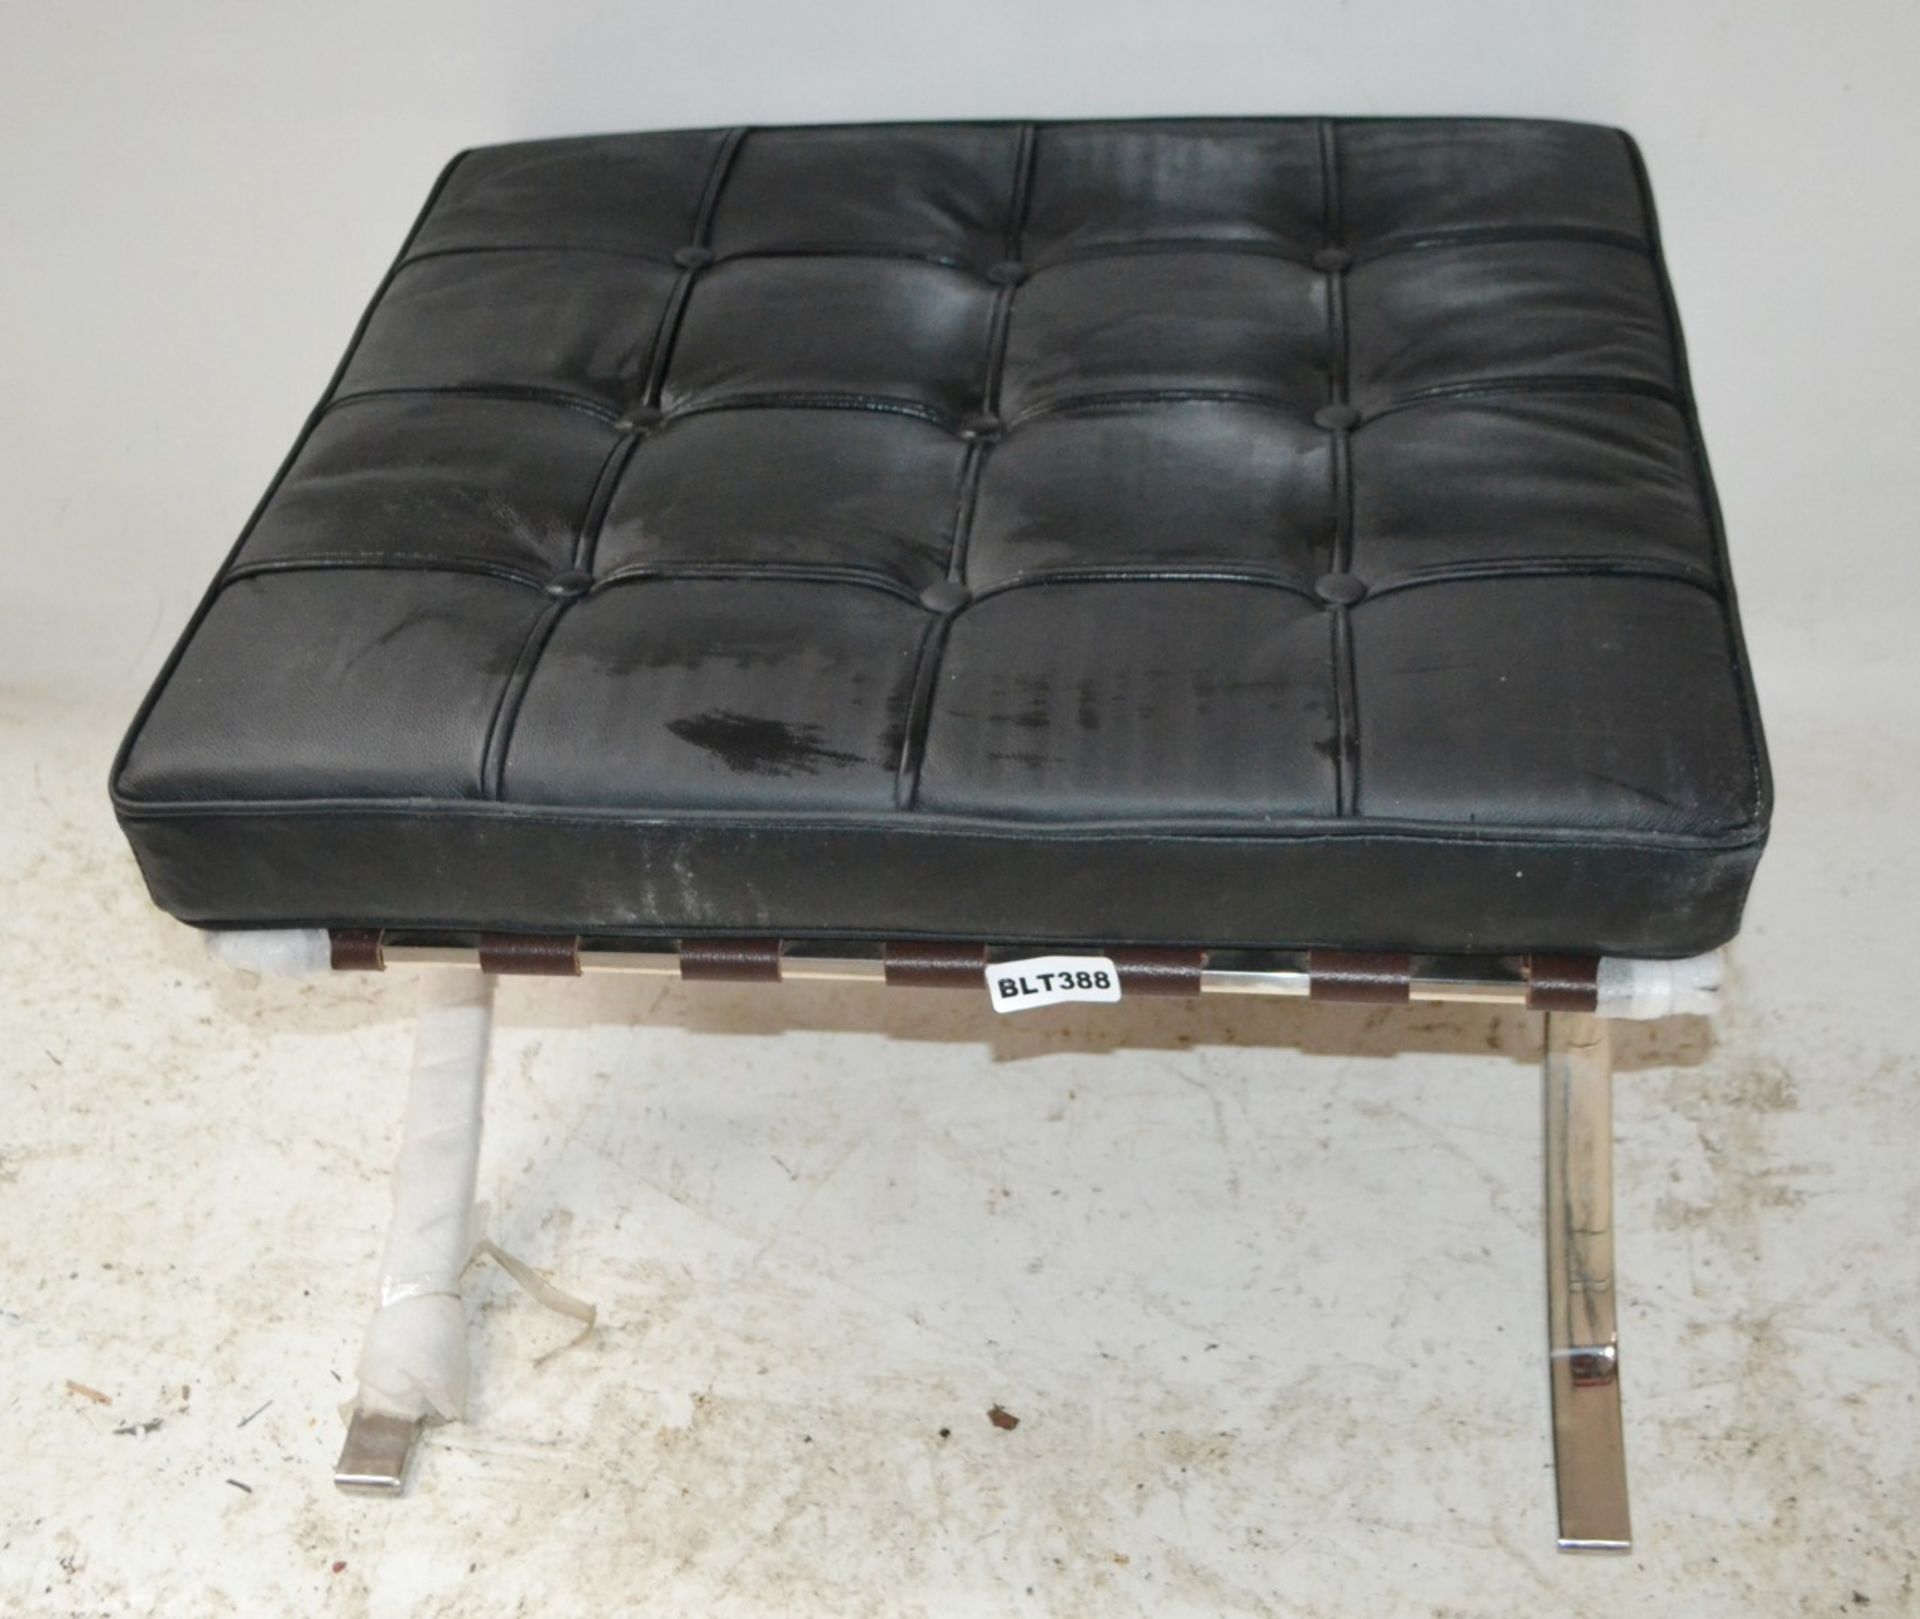 1 x Black Leather Square Foot Stool With Stainless Steel Cross Legs - Ref: BLT388 - Location: WA14